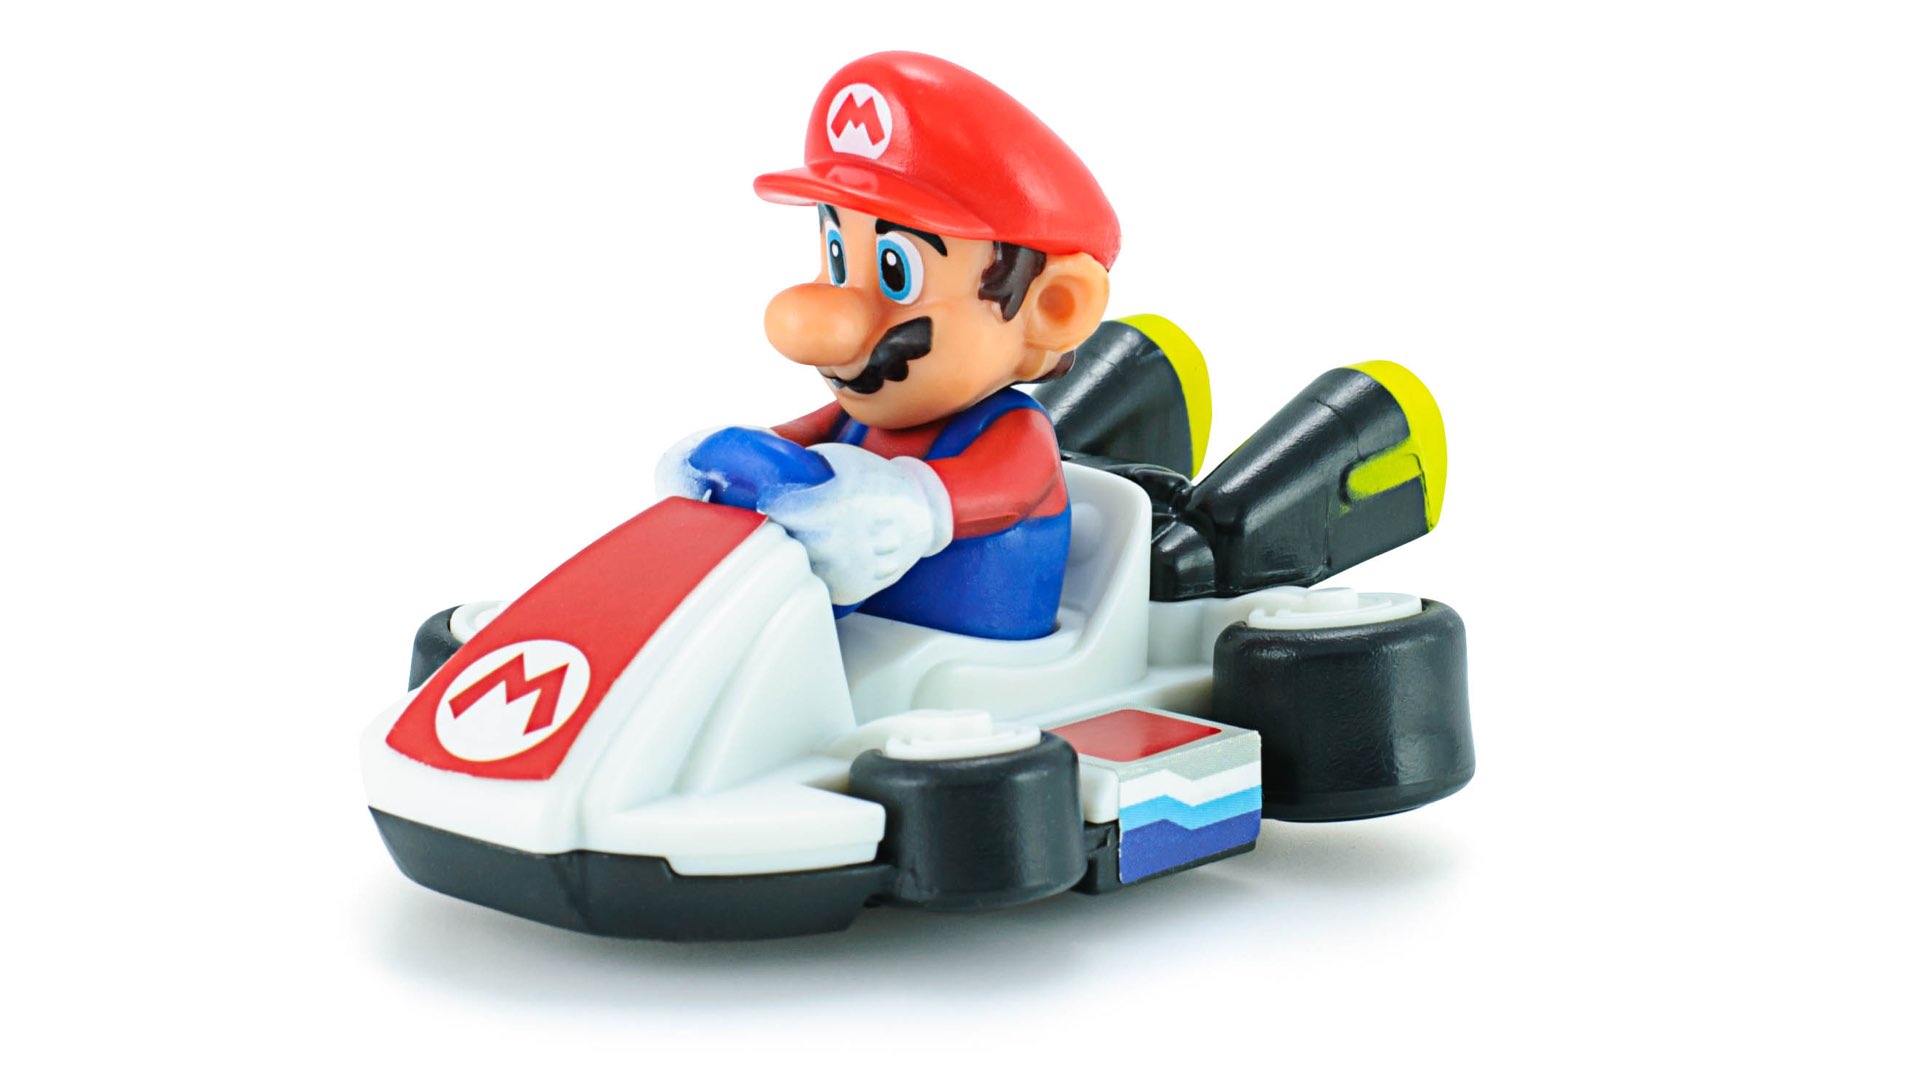 Figurine of Super Mario on a Kart from the Nintendo game Mario Kart.